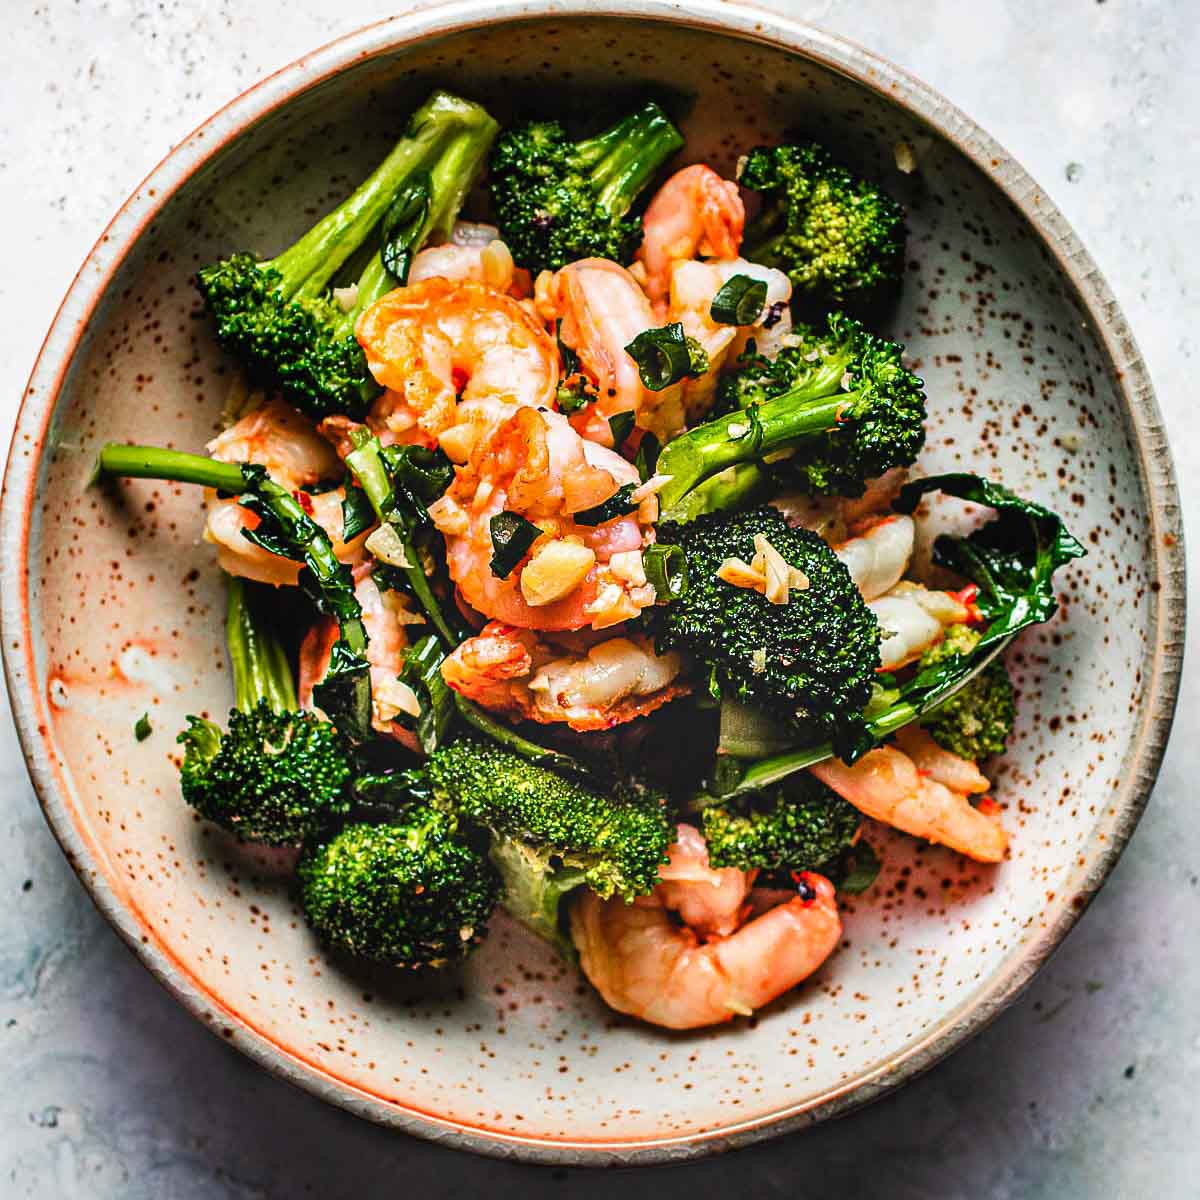 Chinese Shrimp and Broccoli Stir Fry with Garlic Sauce